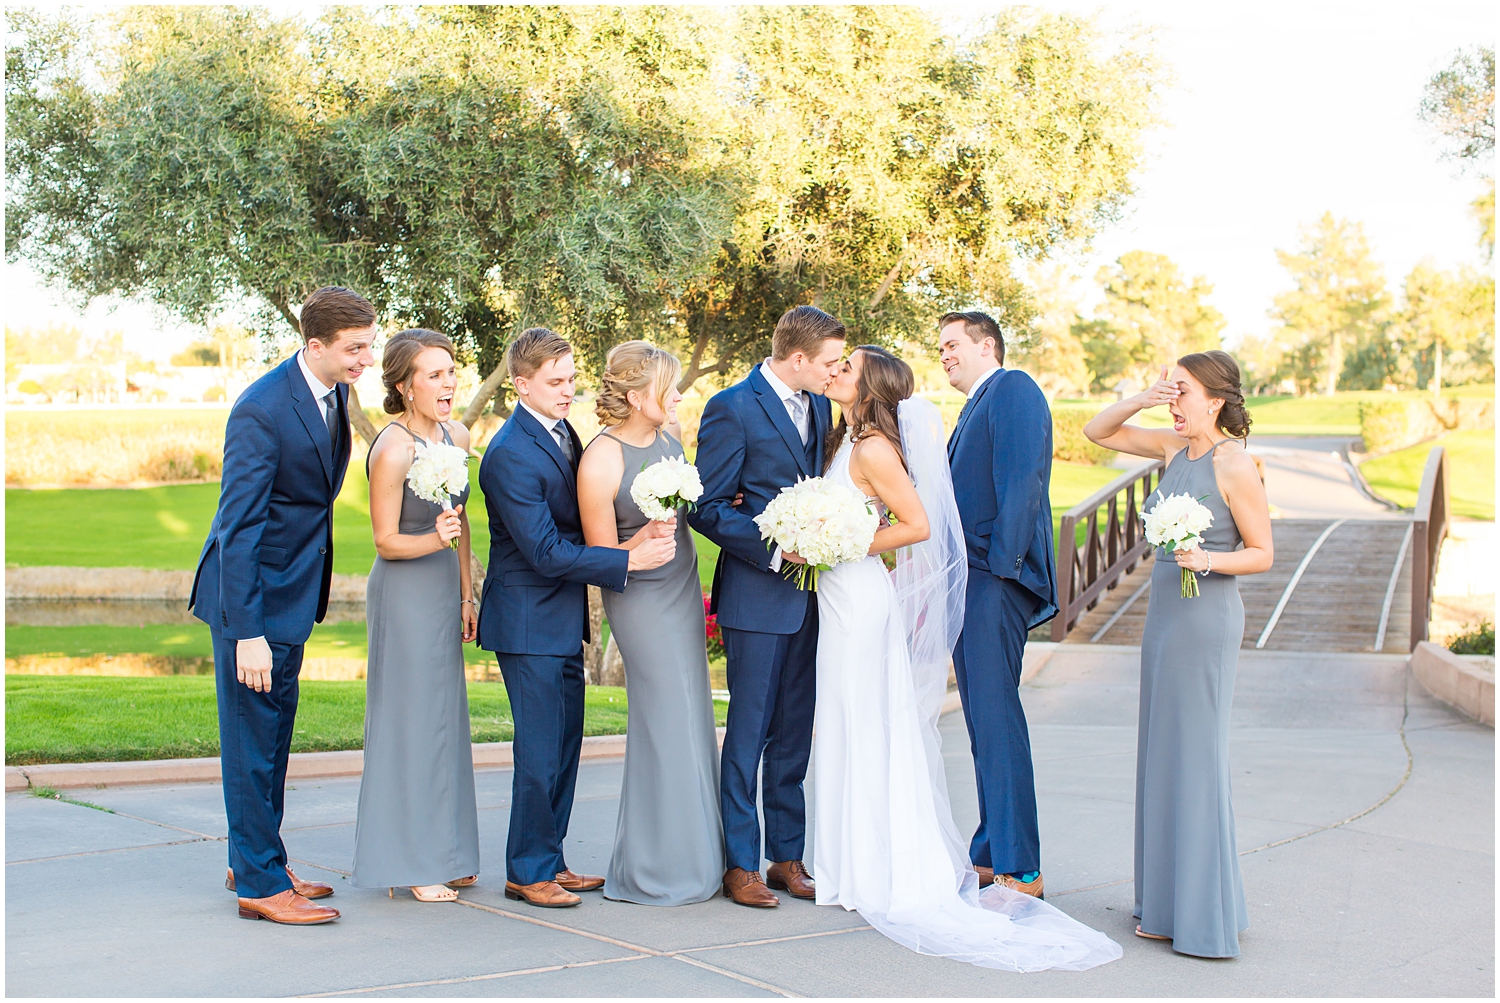 bride in demetrios bridal gown racerback with sheer beading with white hydrangeas bouquet with bridesmaids in gray dresses and groom and groomsmen in navy blue suit with light blue tie wedding party picture